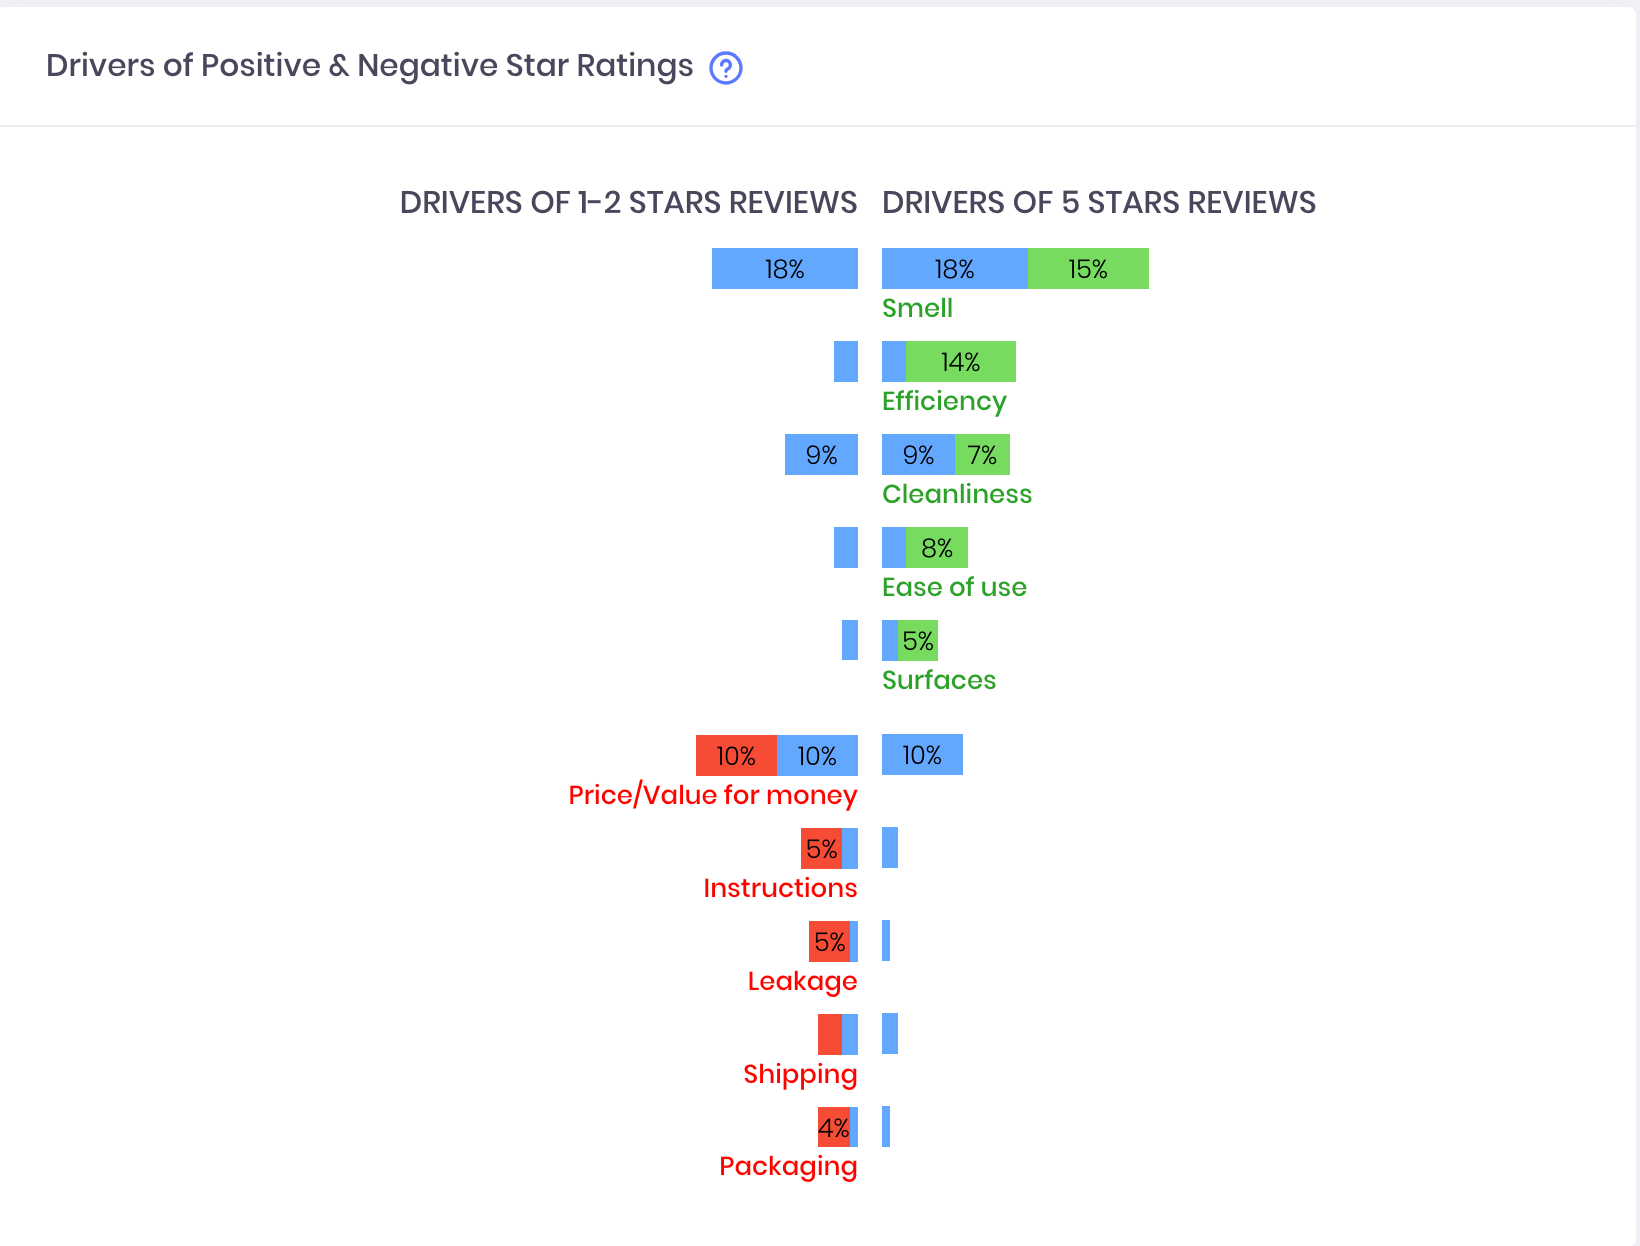 Star rating drivers for the Home Cleaning Category can help marketers with their campaigns.